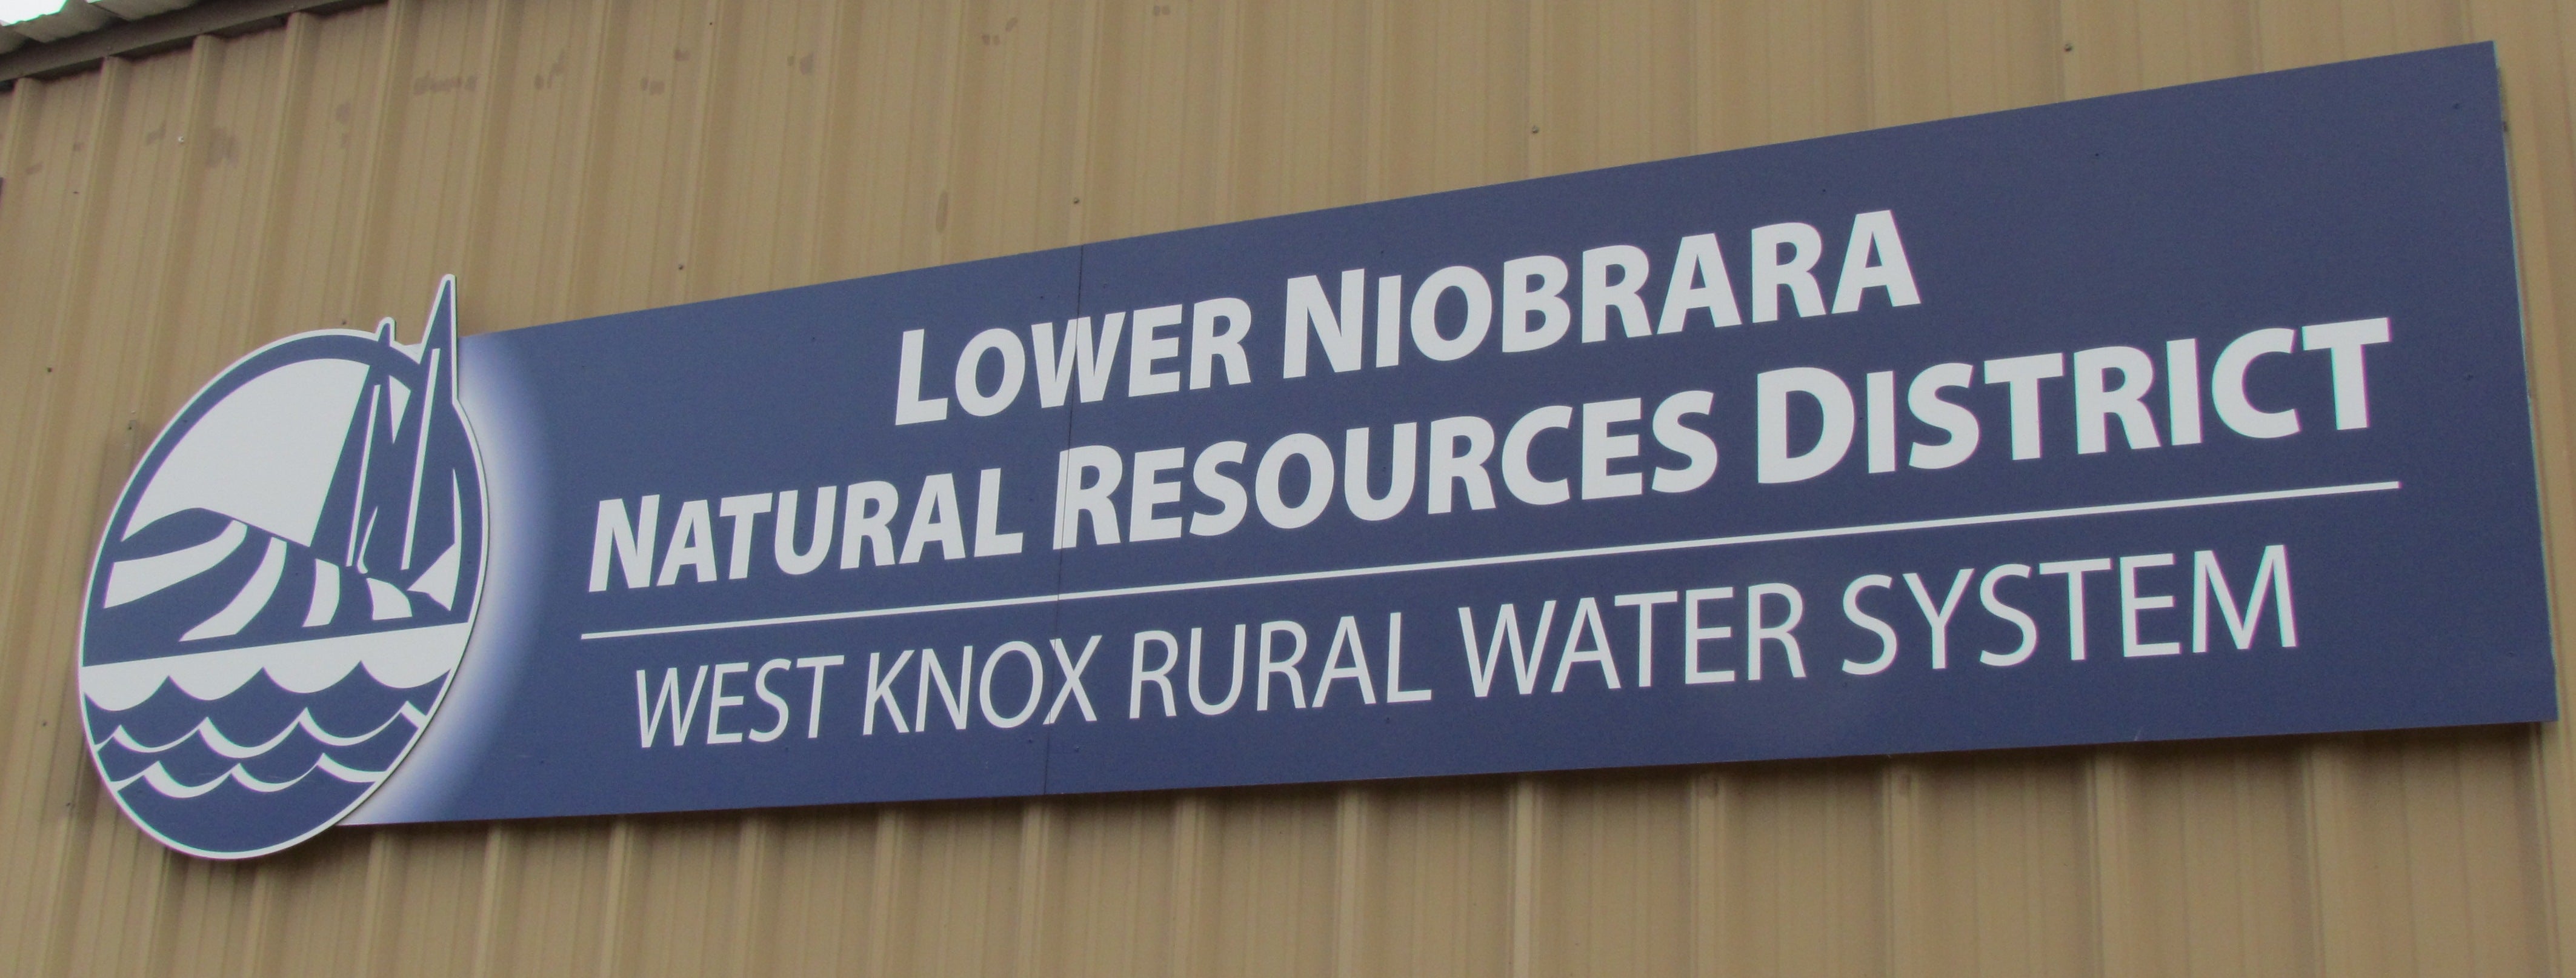 West Knox Rural Water System Sign